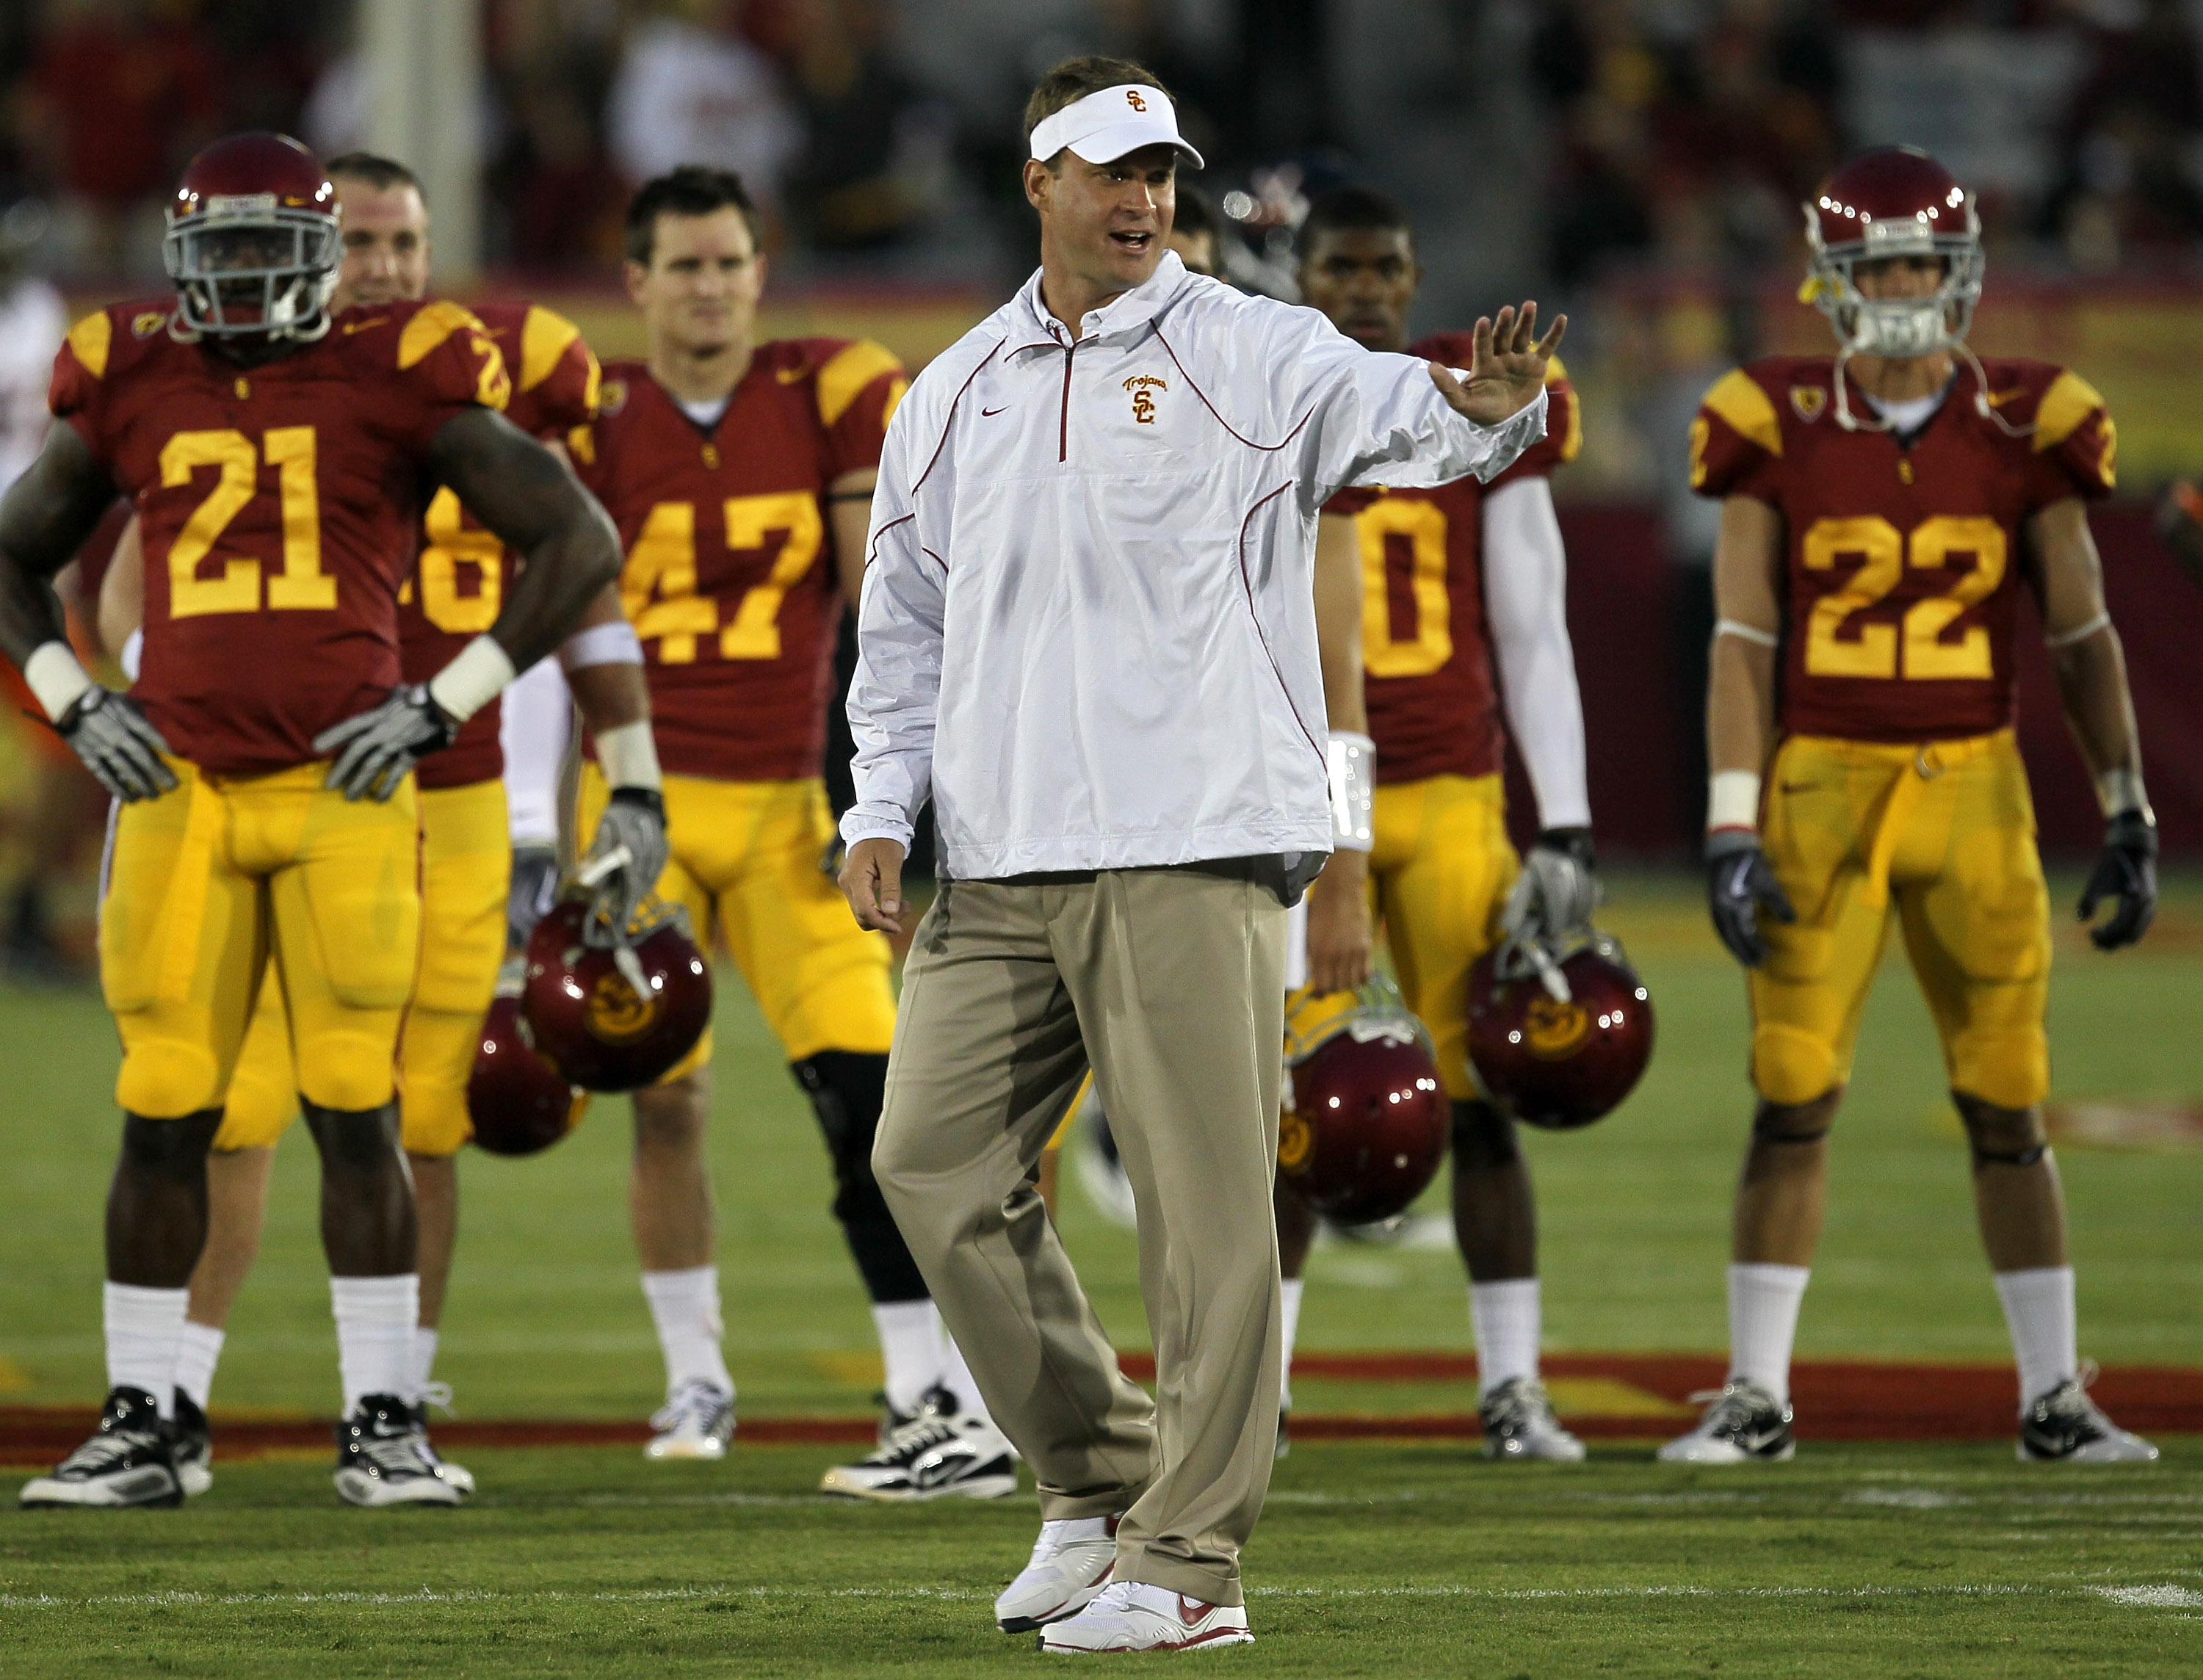 LOS ANGELES, CA - SEPTEMBER 11:  Head coach Lane Kiffin gestures as the USC Trojans warm up for their game with the Virginia Cavaliers at Los Angeles Memorial Coliseum on September 11, 2010 in Los Angeles, California.  (Photo by Stephen Dunn/Getty Images)